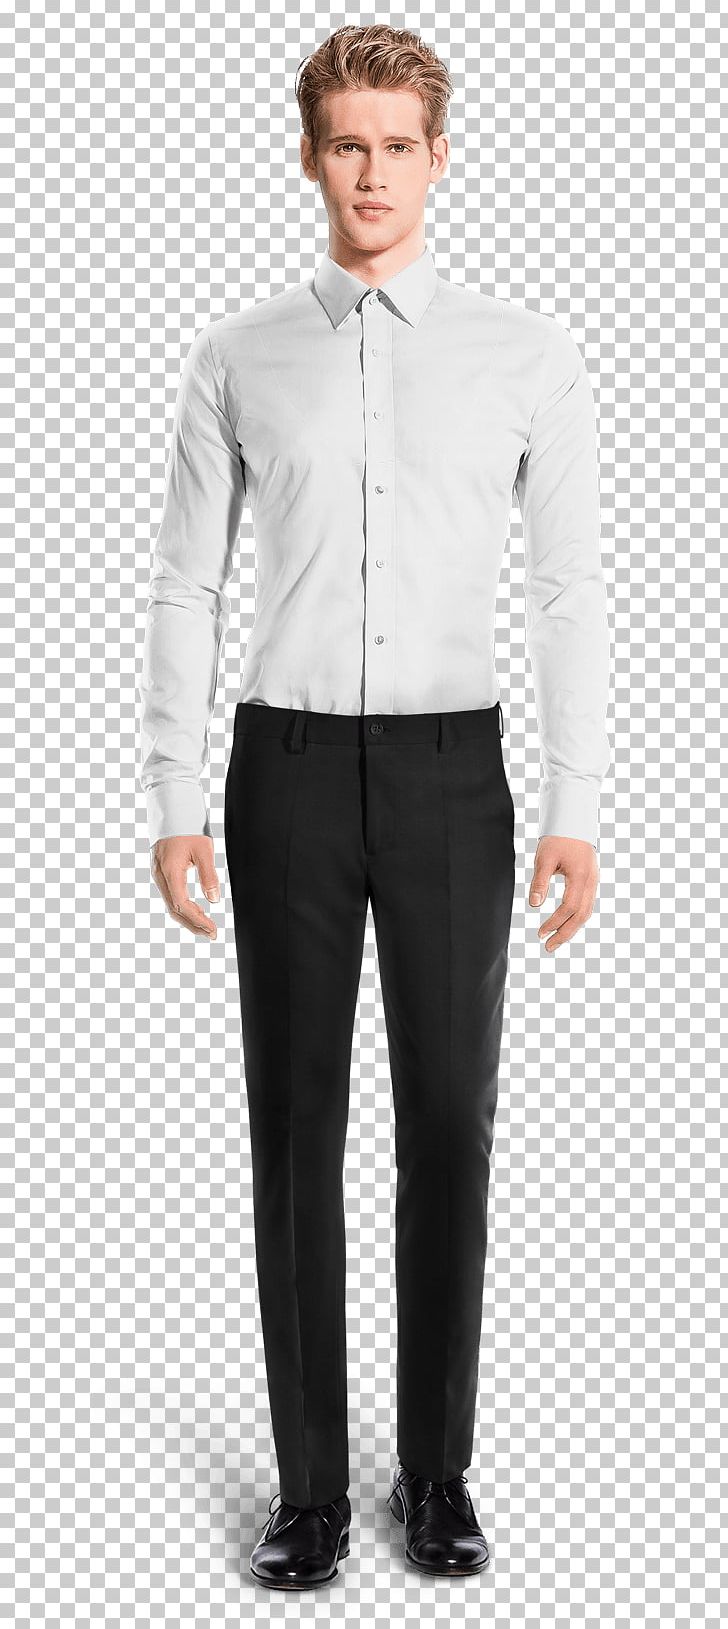 Suit Tuxedo Linen Velvet Cotton PNG, Clipart, Black Tie, Bow Tie, Businessperson, Chino Cloth, Clothing Free PNG Download